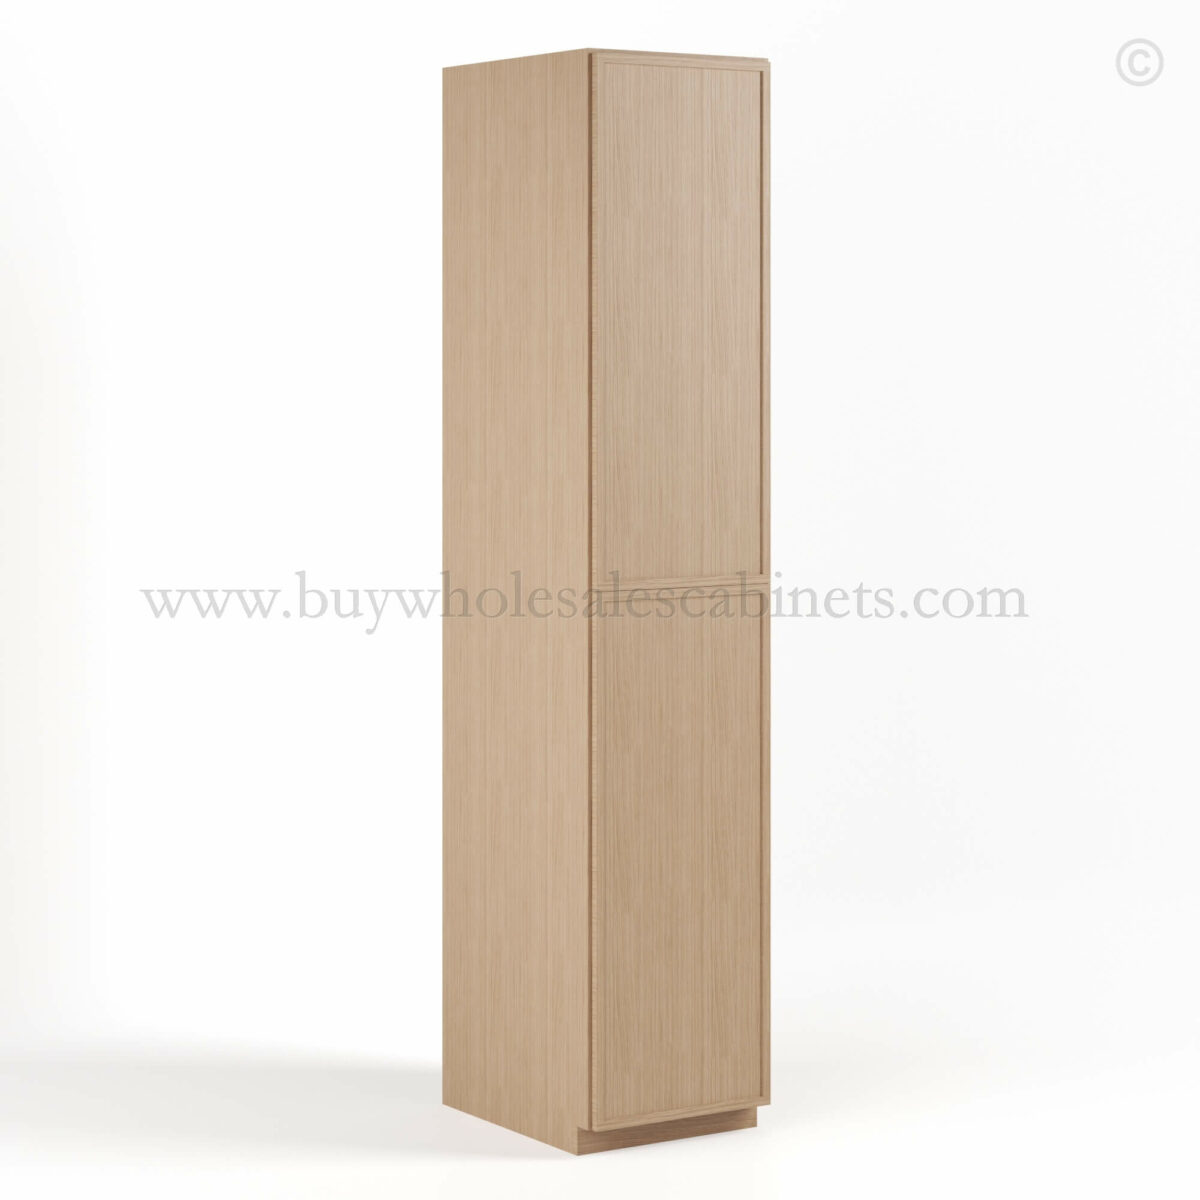 Slim Oak Shaker Tall Pantry Cabinet with 2 Doors, rta cabinets, wholesale cabinets